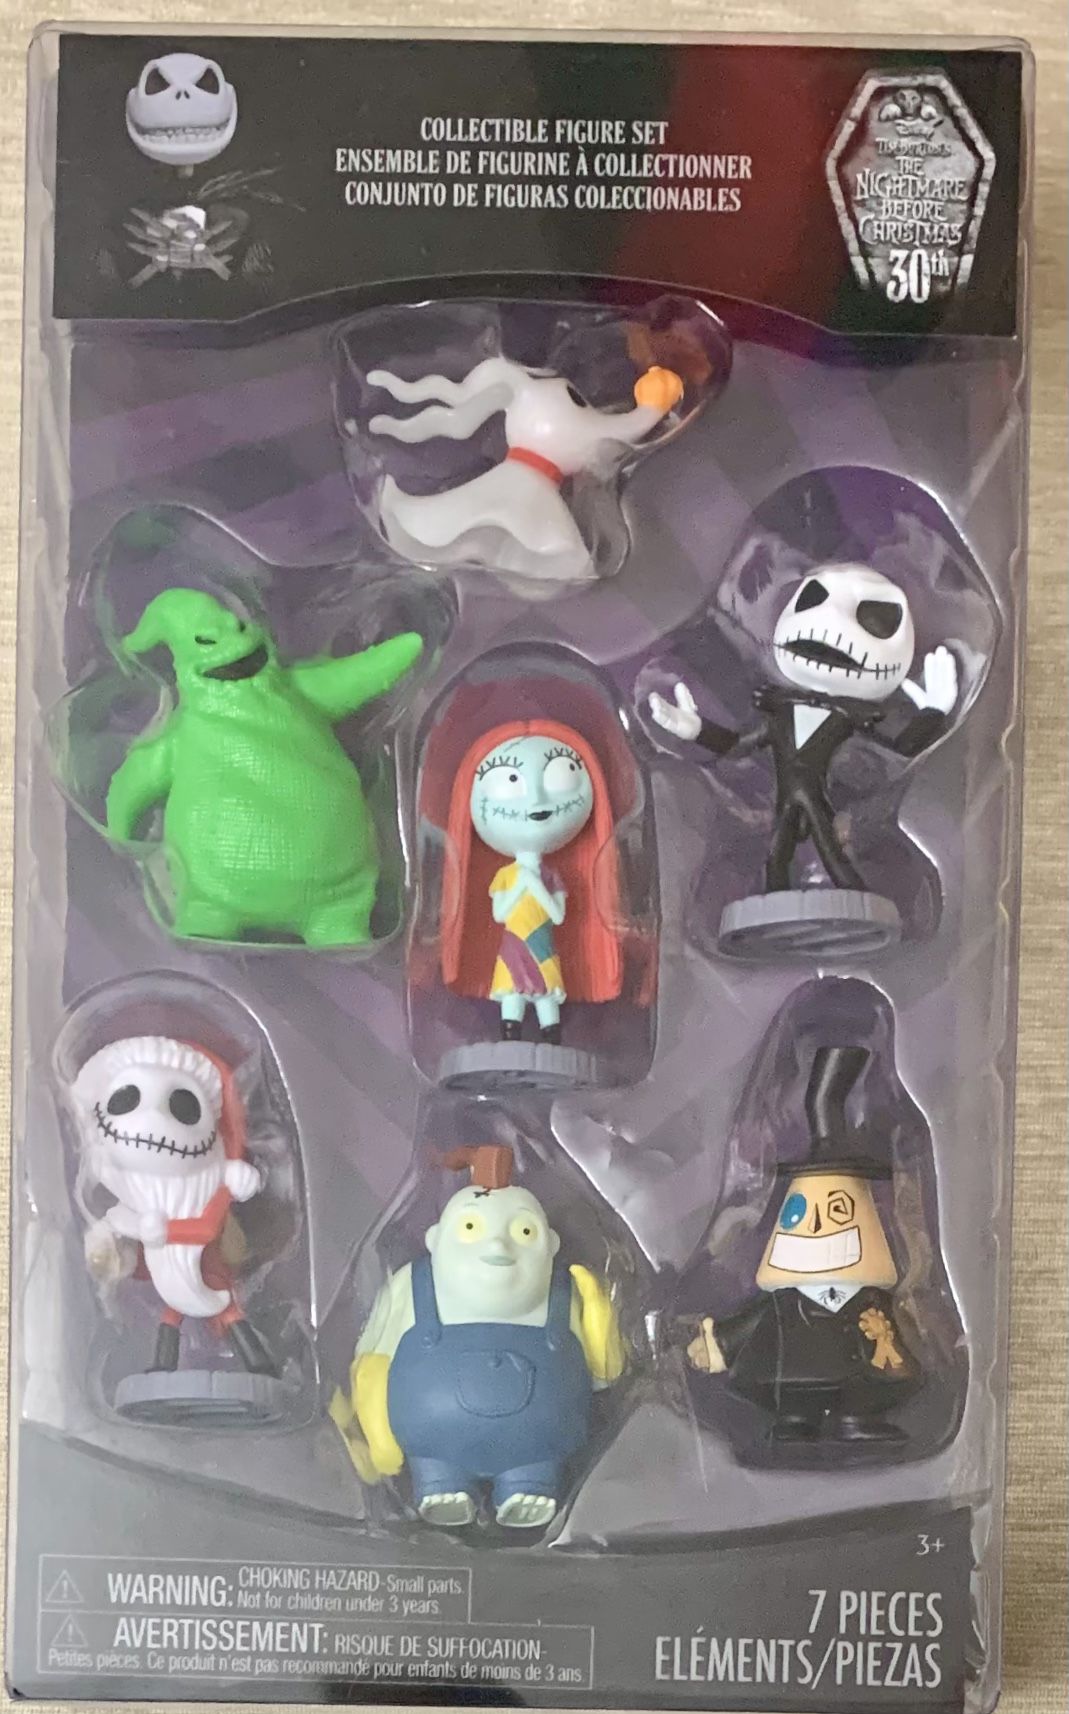 The Nightmare Before Christmas 30Th Anniversary Collectible Figure Set